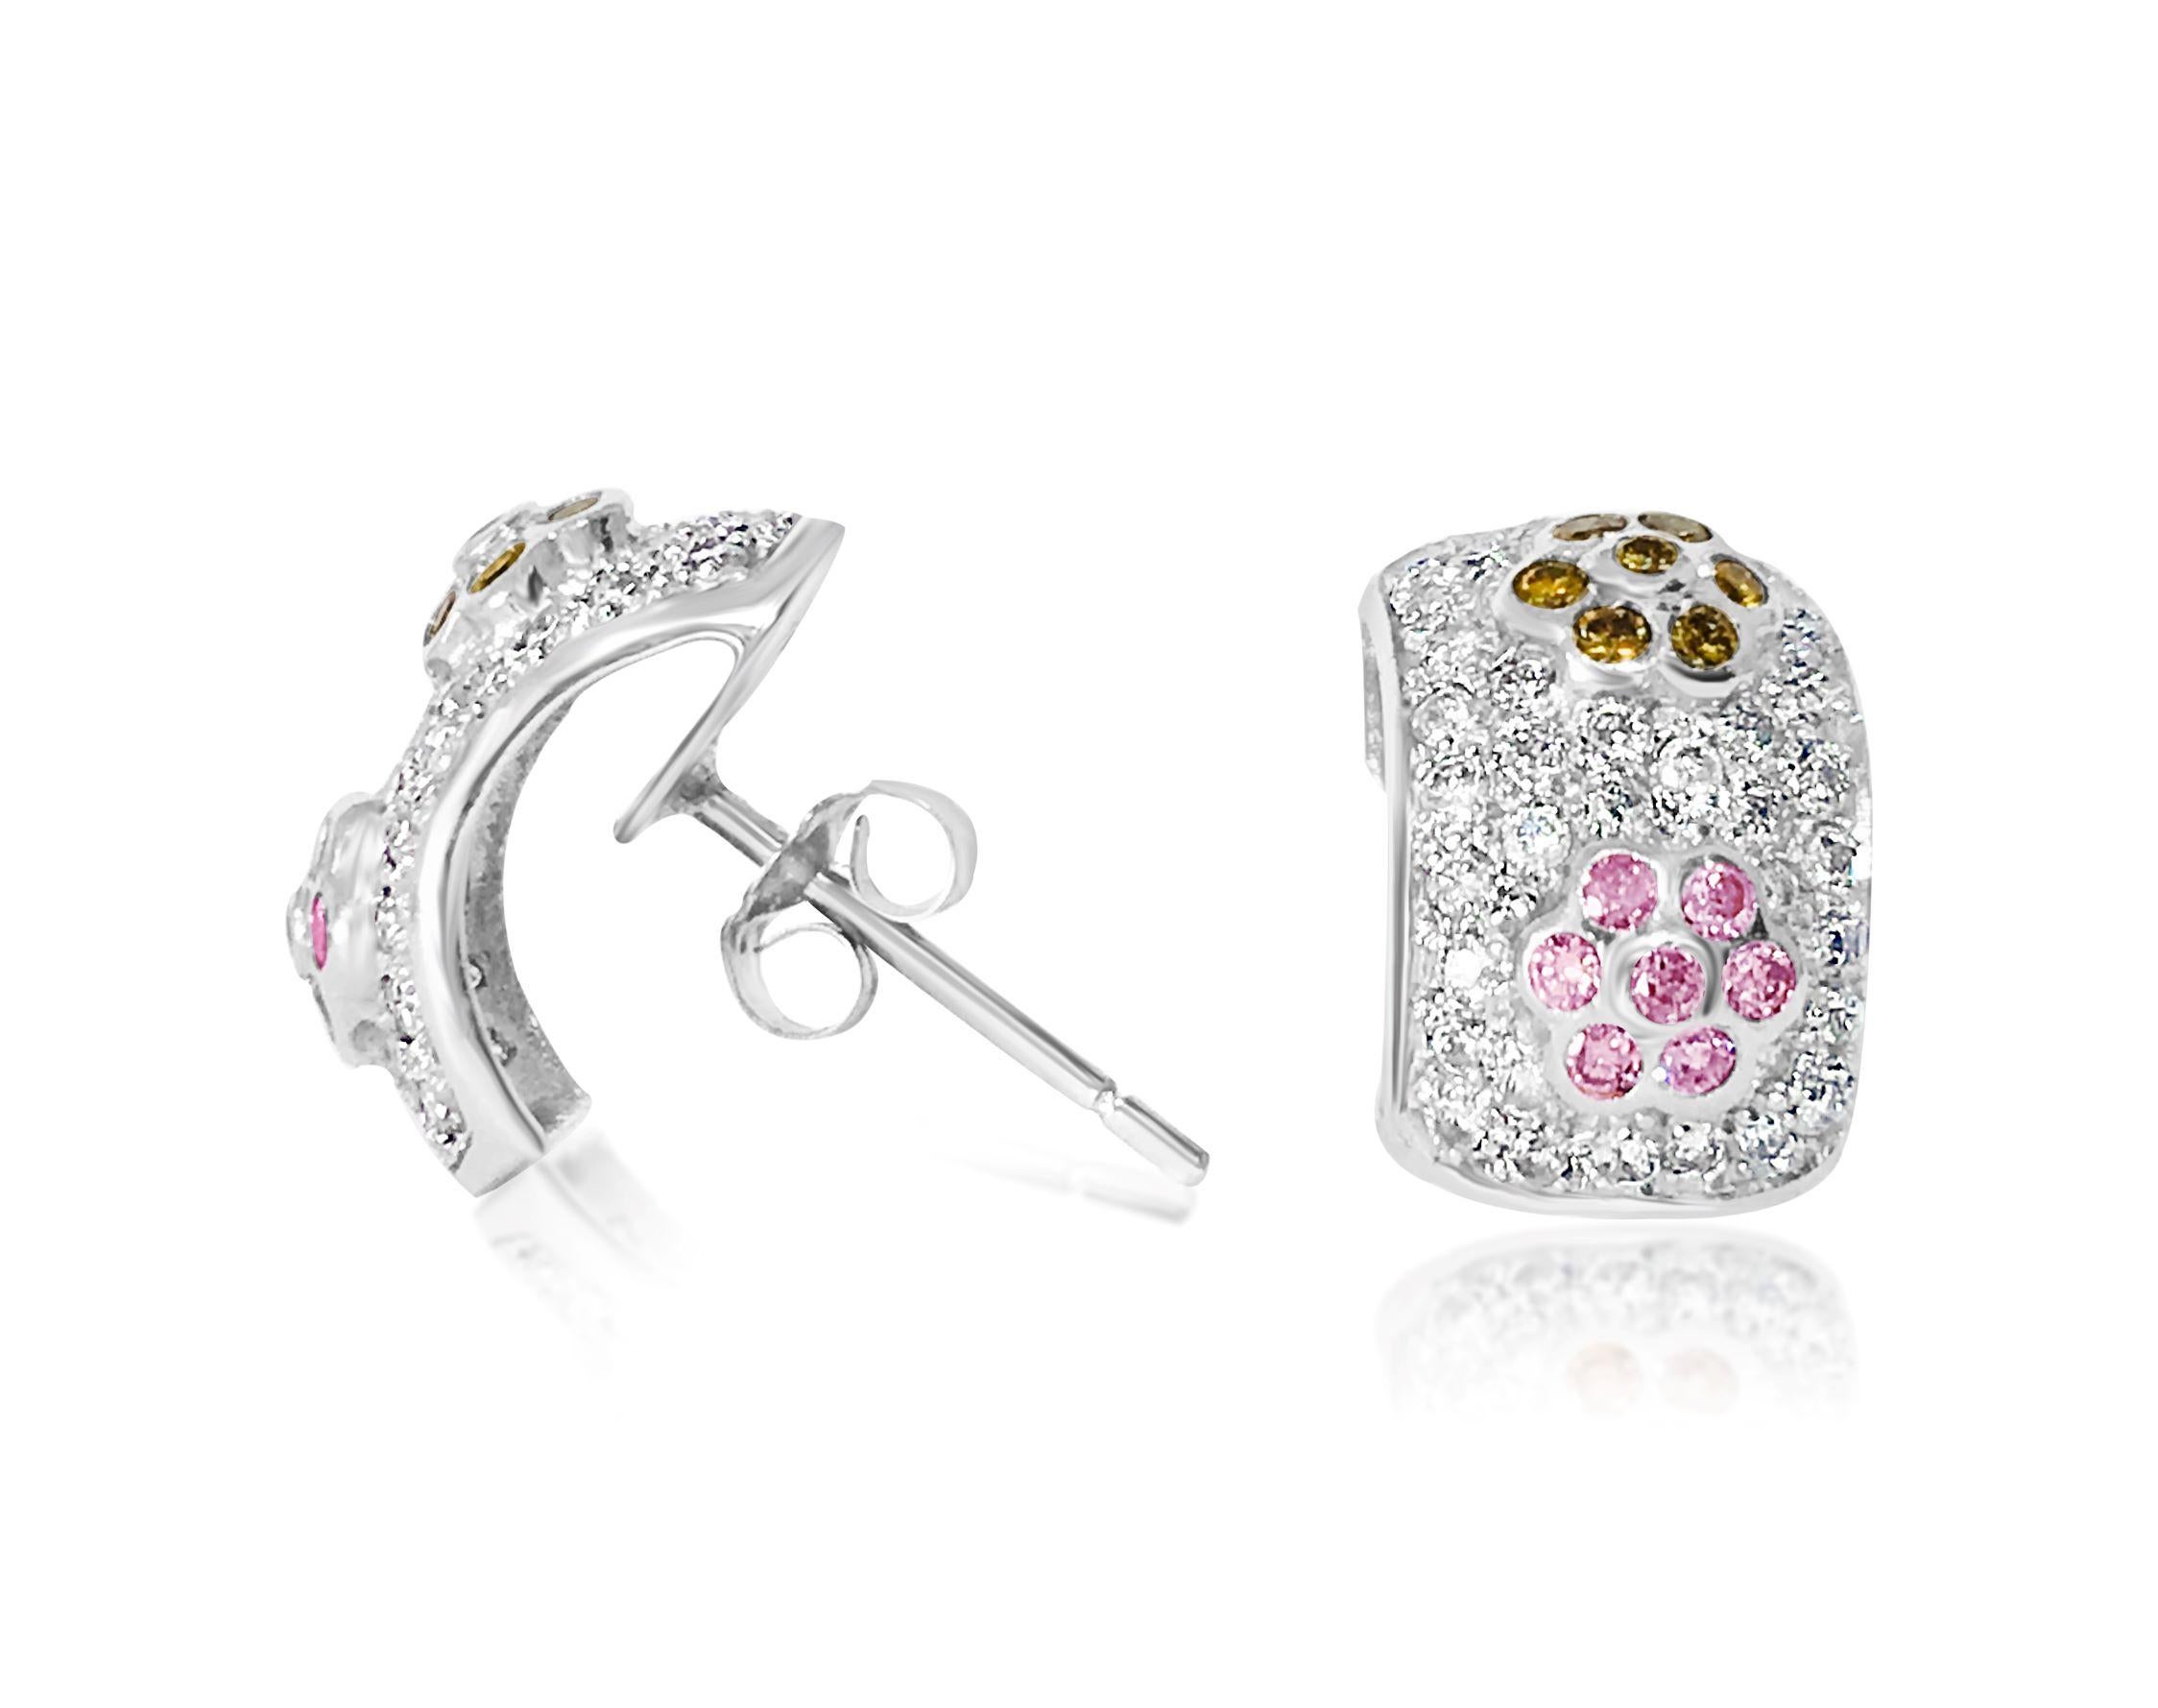 Medieval 2.0 CT white, pink & yellow diamonds in 14k earrings For Sale